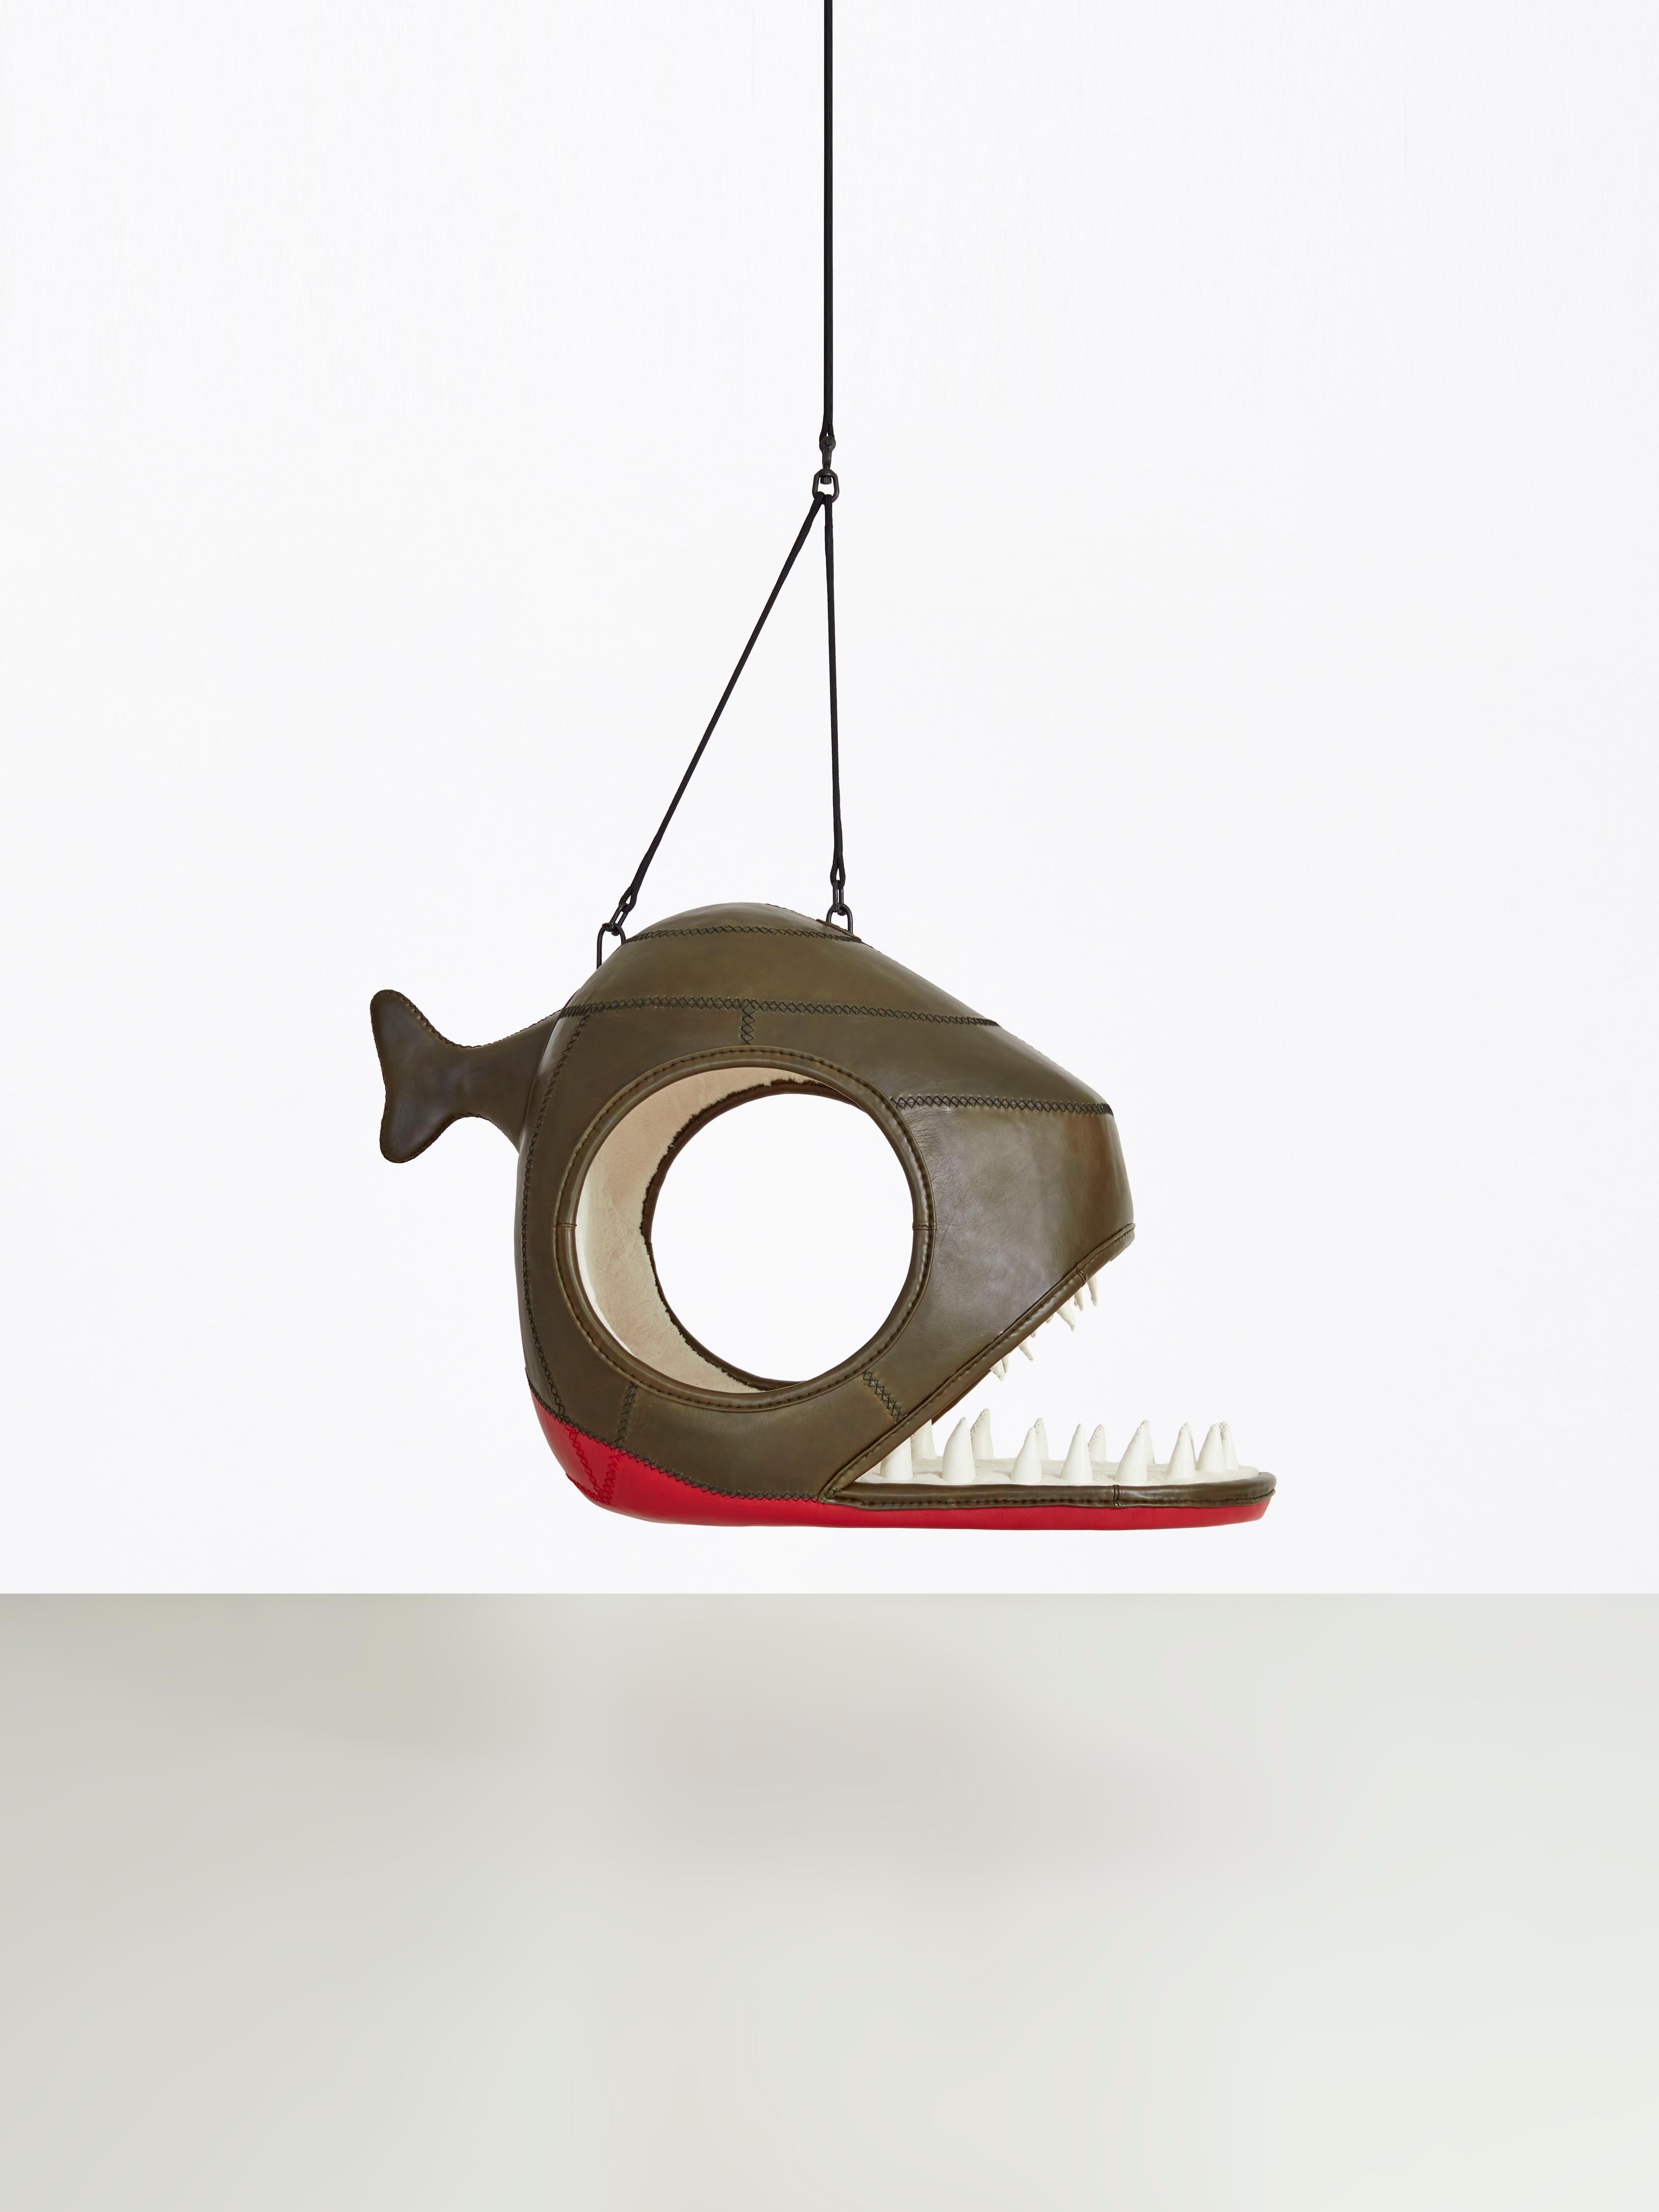 Porky Hefer’s menagerie of sculptural seating pods have become renowned and recognisable forms in the global design landscape. Here, Hefer’s design takes the form of a gargantuan piranha. Beyond the bared, leather teeth of the fish’s gaping mouth,